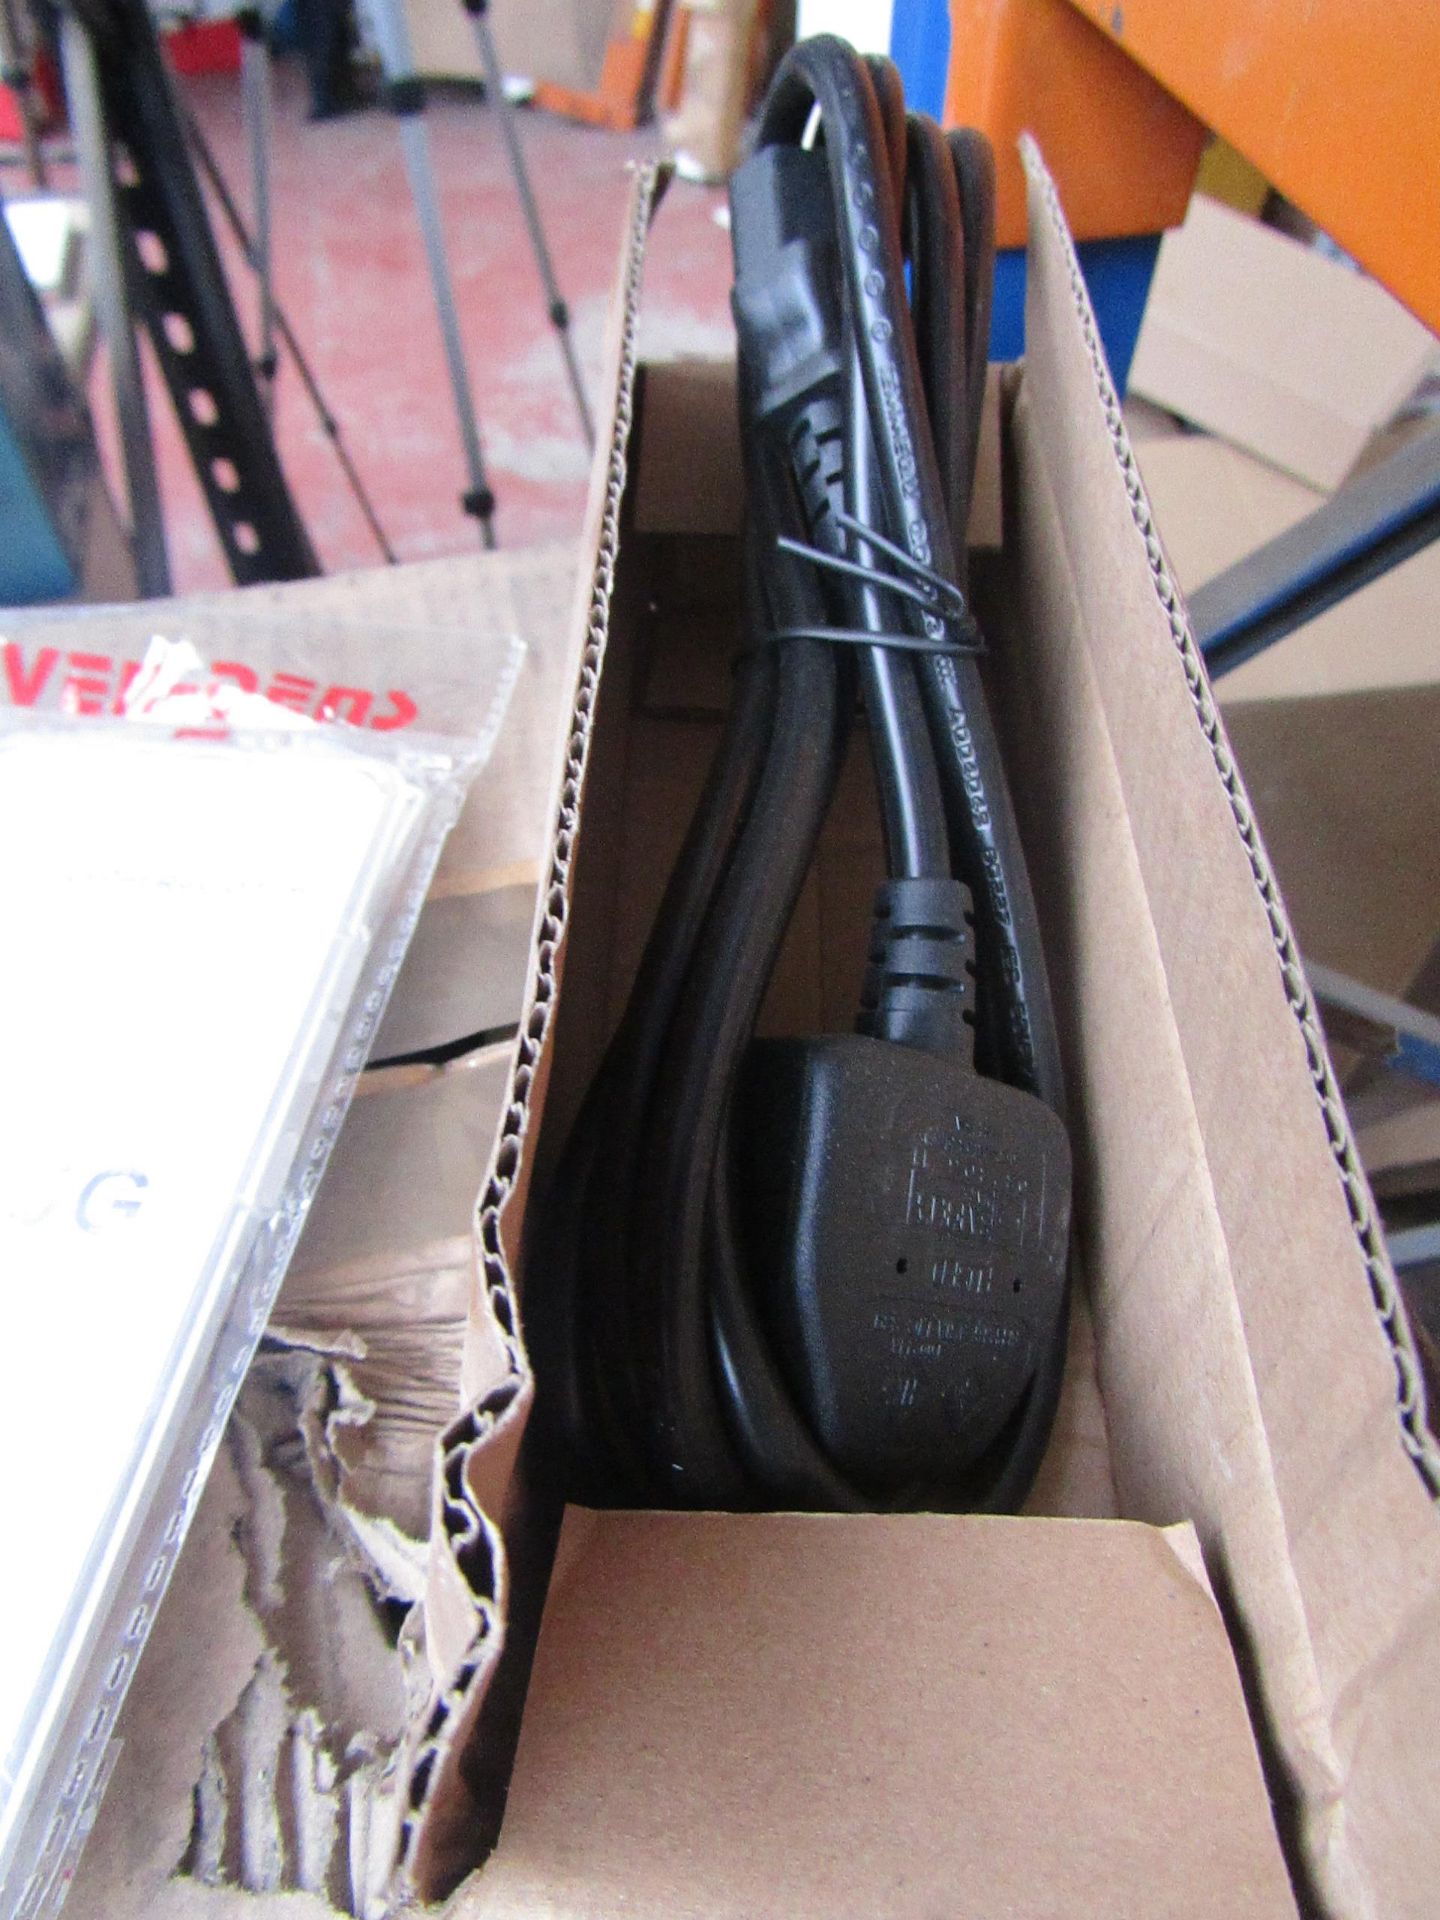 6x Kettle Lead Power Cable - New & Boxed.